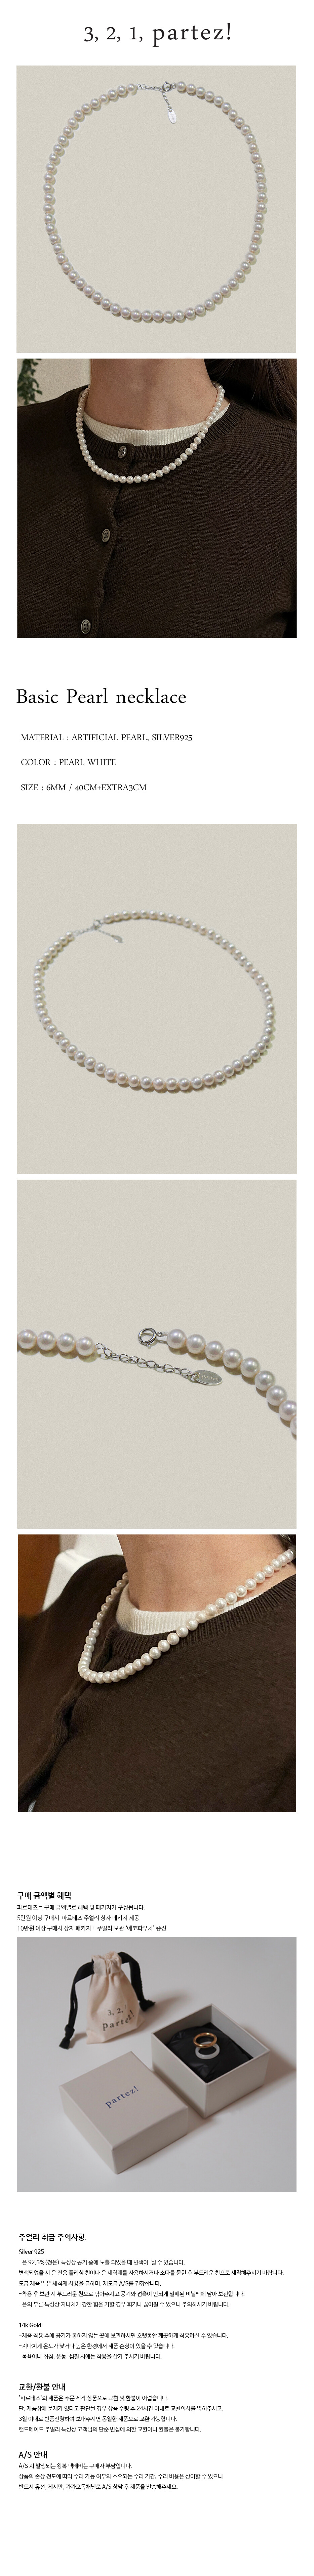 Basic Pearl necklace